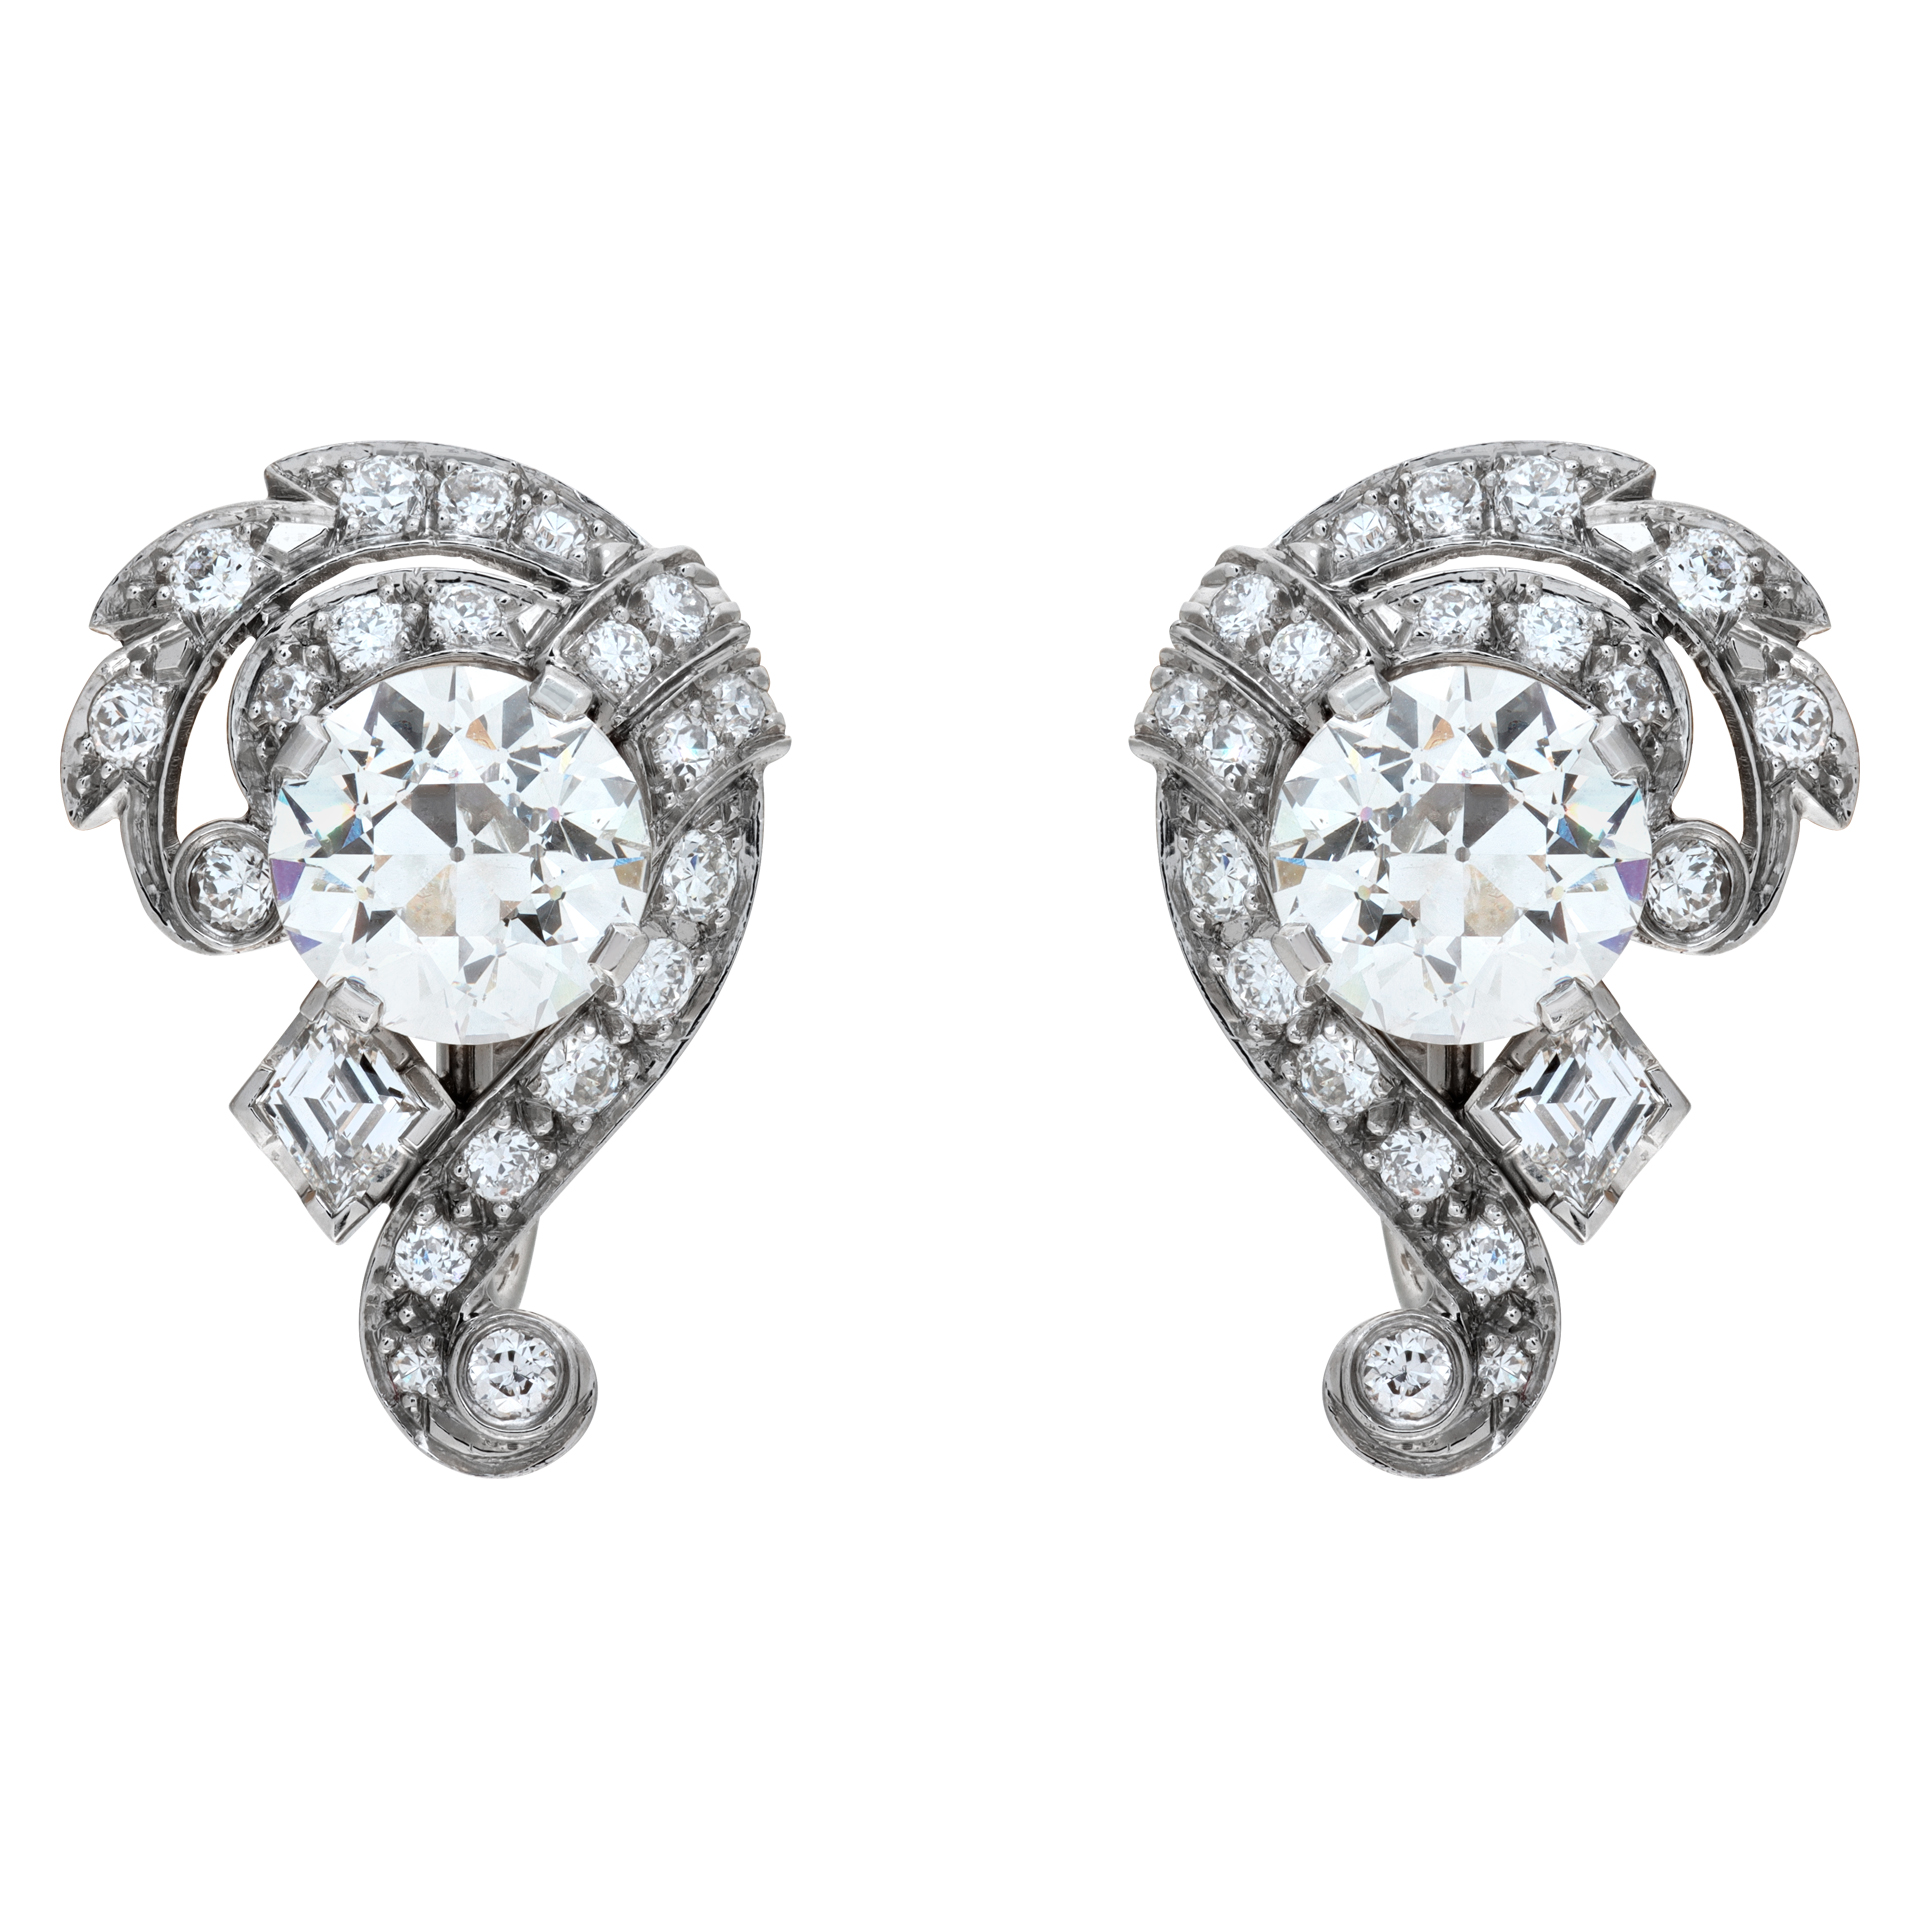 GIA certified Old European Brilliant cut diamonds earrings set in platinum with 14K white gold closing clasp. GIA certified old European brilliant center diamond 1.48 carat, J color, VS2 clarity and old European brilliant center diamond 1.48 carat J color